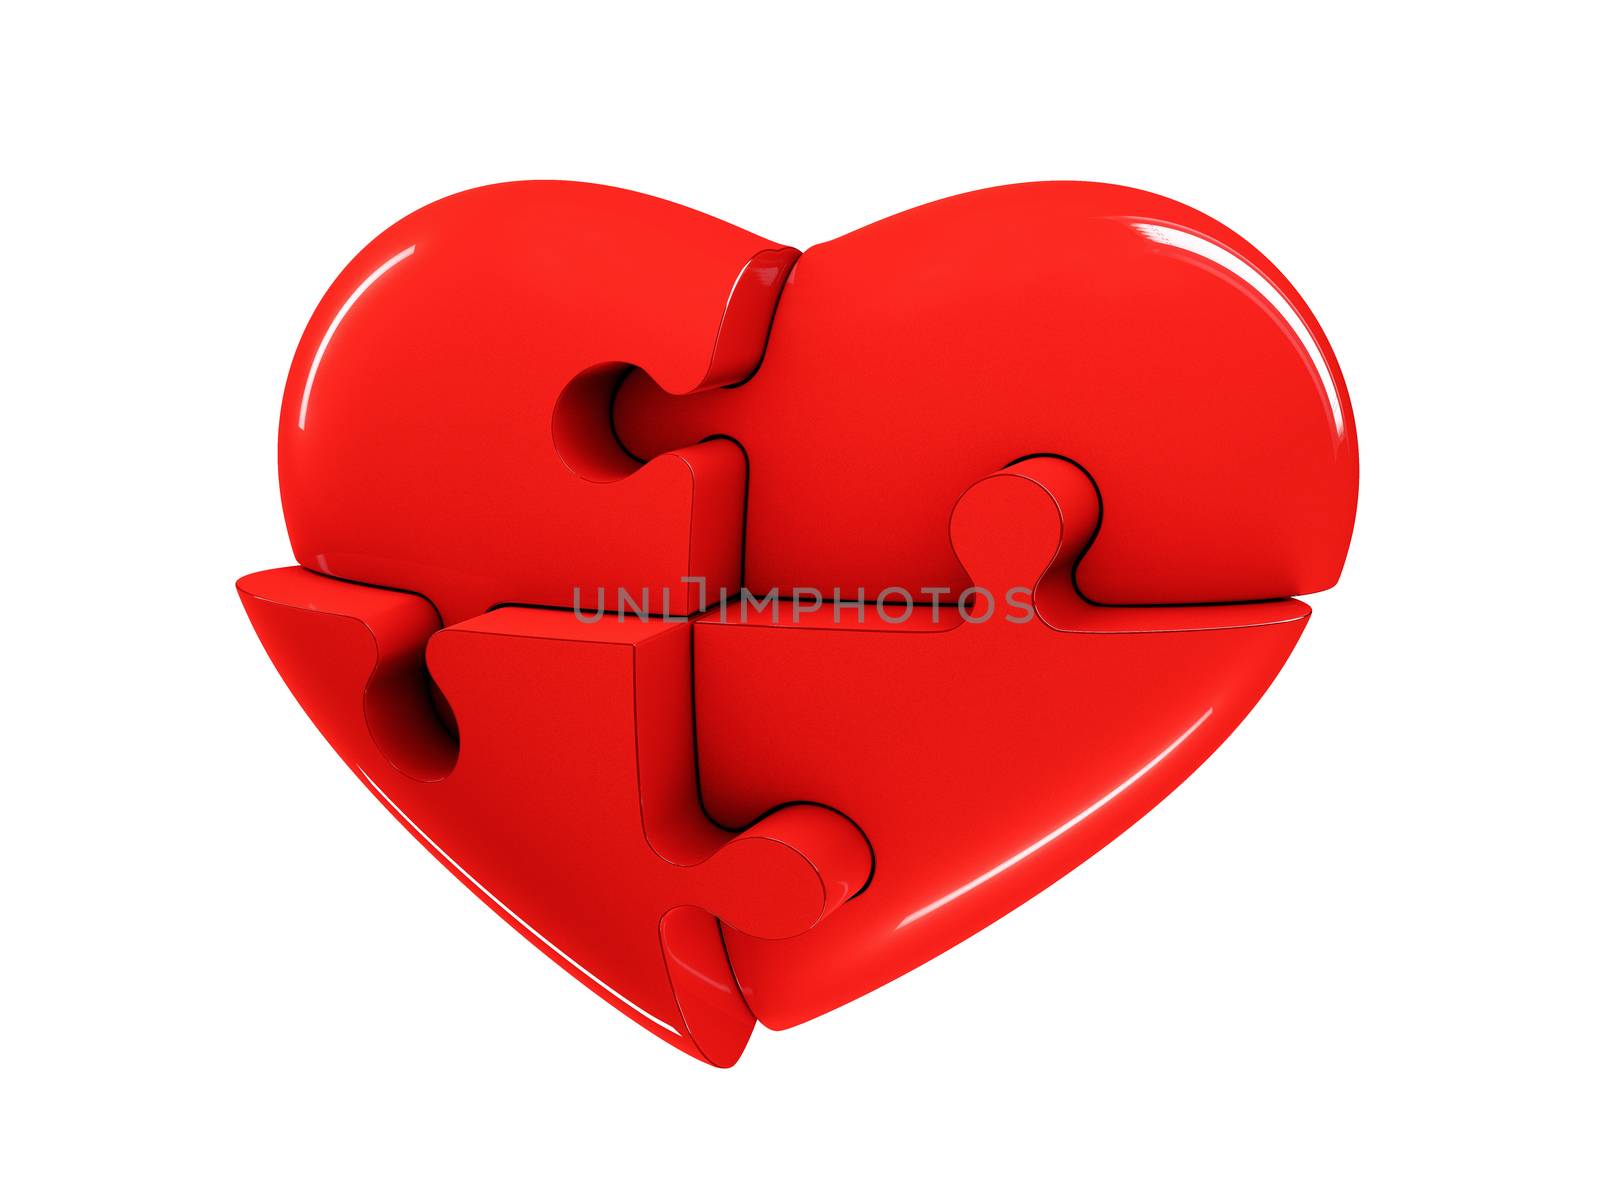 Red jigsaw puzzle heart diagram 3d illustration isolated on white background by tussik